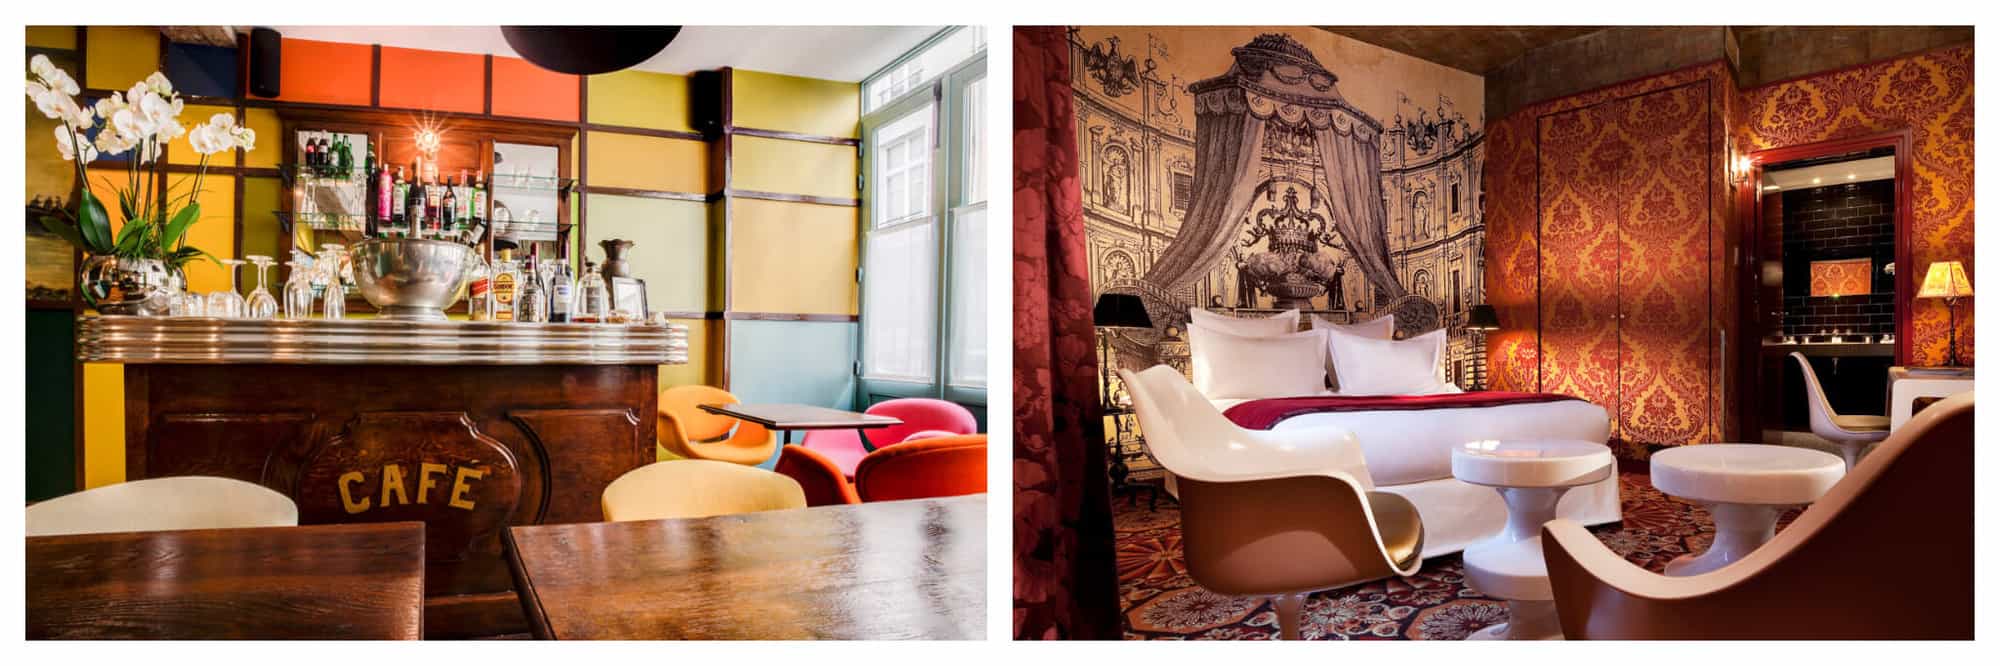 Left: the retro honesty bar at Hotel du Petit Moulin. Right: one of the lavishly decorated deluxe rooms at Hotel du Petit Moulin.